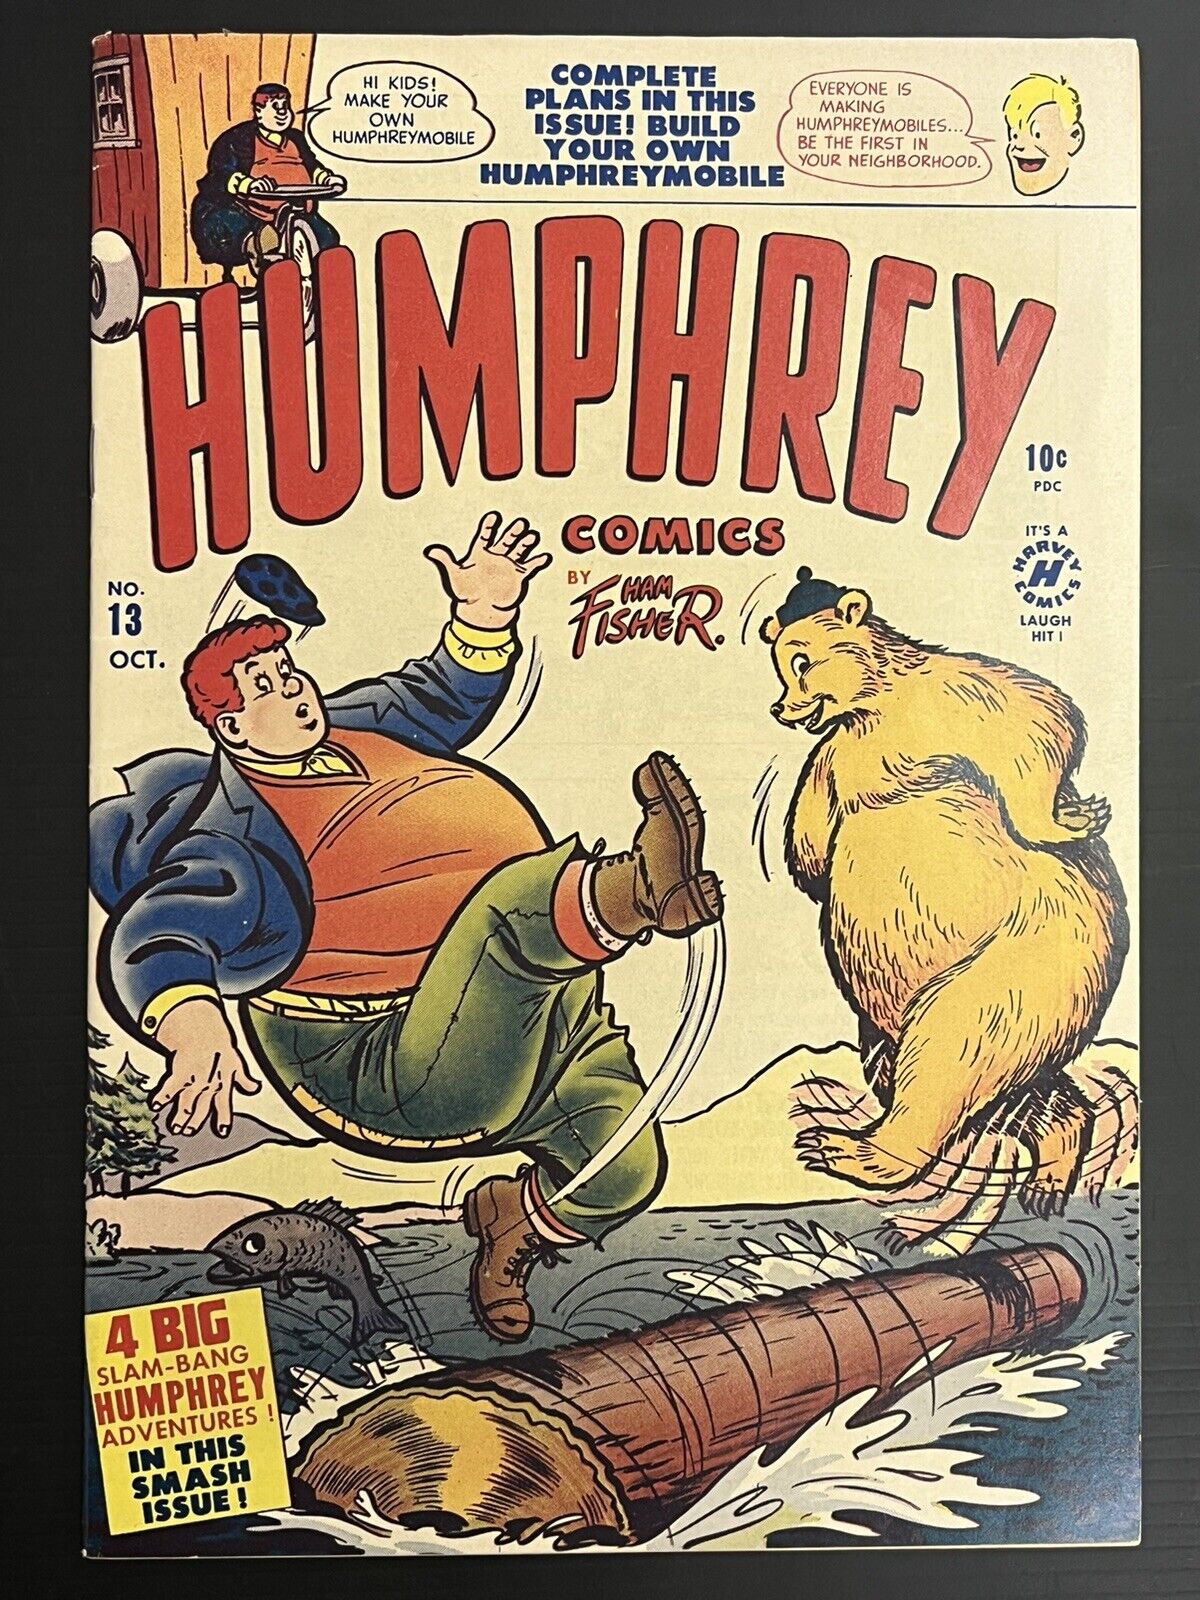 HUMPHREY #13 1948 HARVEY COMICS GOLDEN AGE OFF WHITE PAGES 10 CENT PROSHIPPER